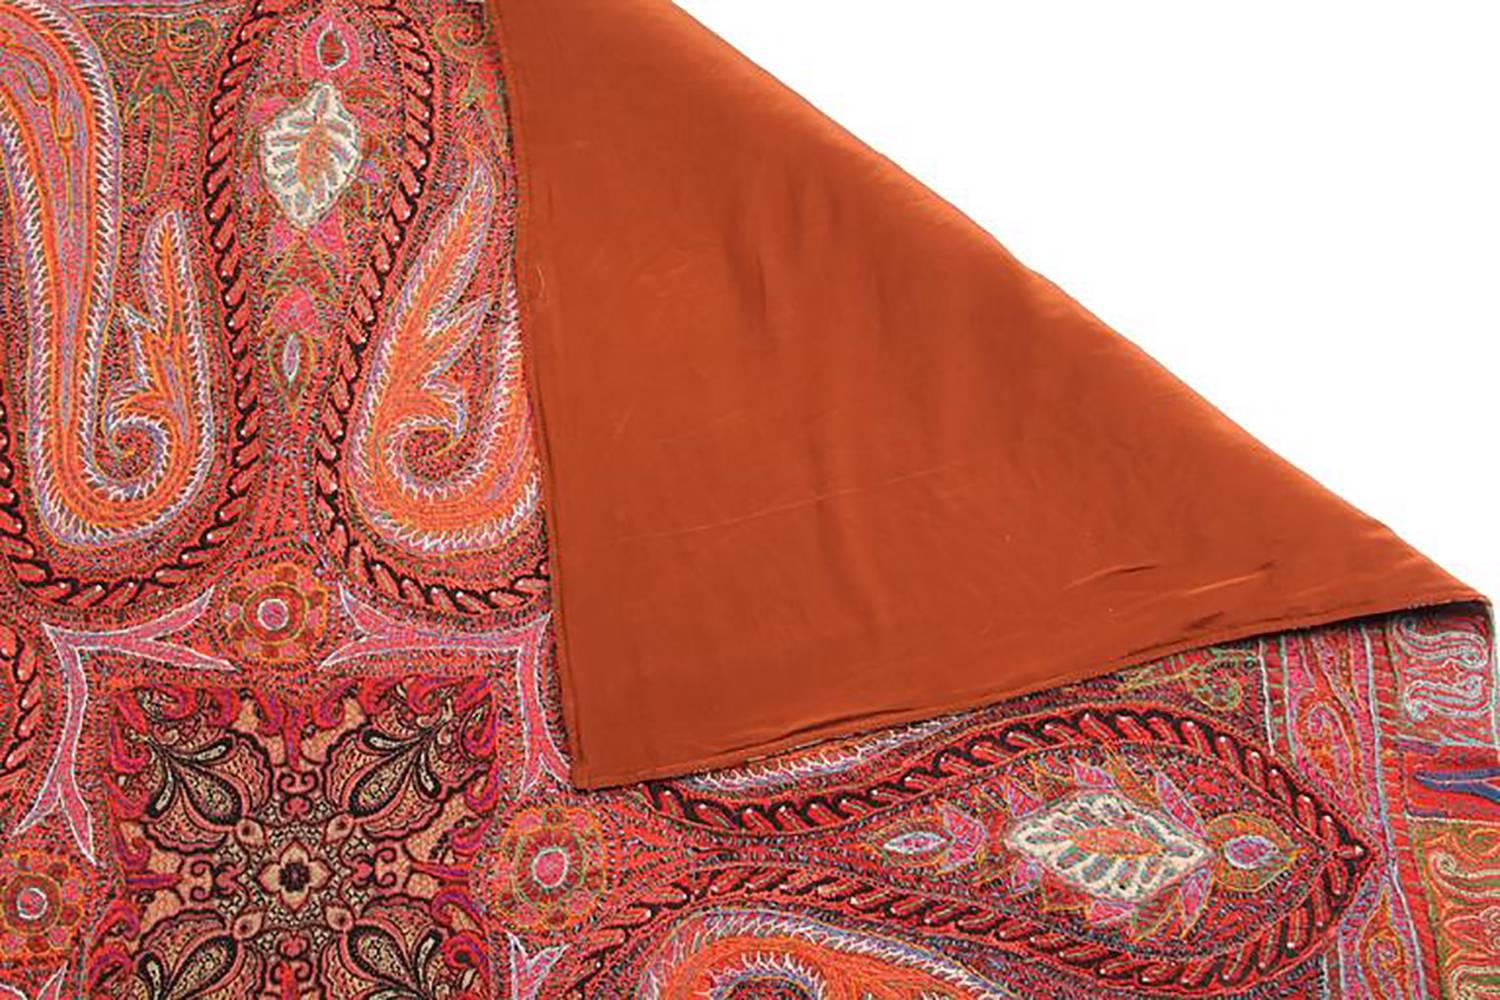 Antique Indian Embroidered Paisley Shawl Blanket, backed in modern silk. Can be worn as a shawl or used as a decorative throw blanket. 